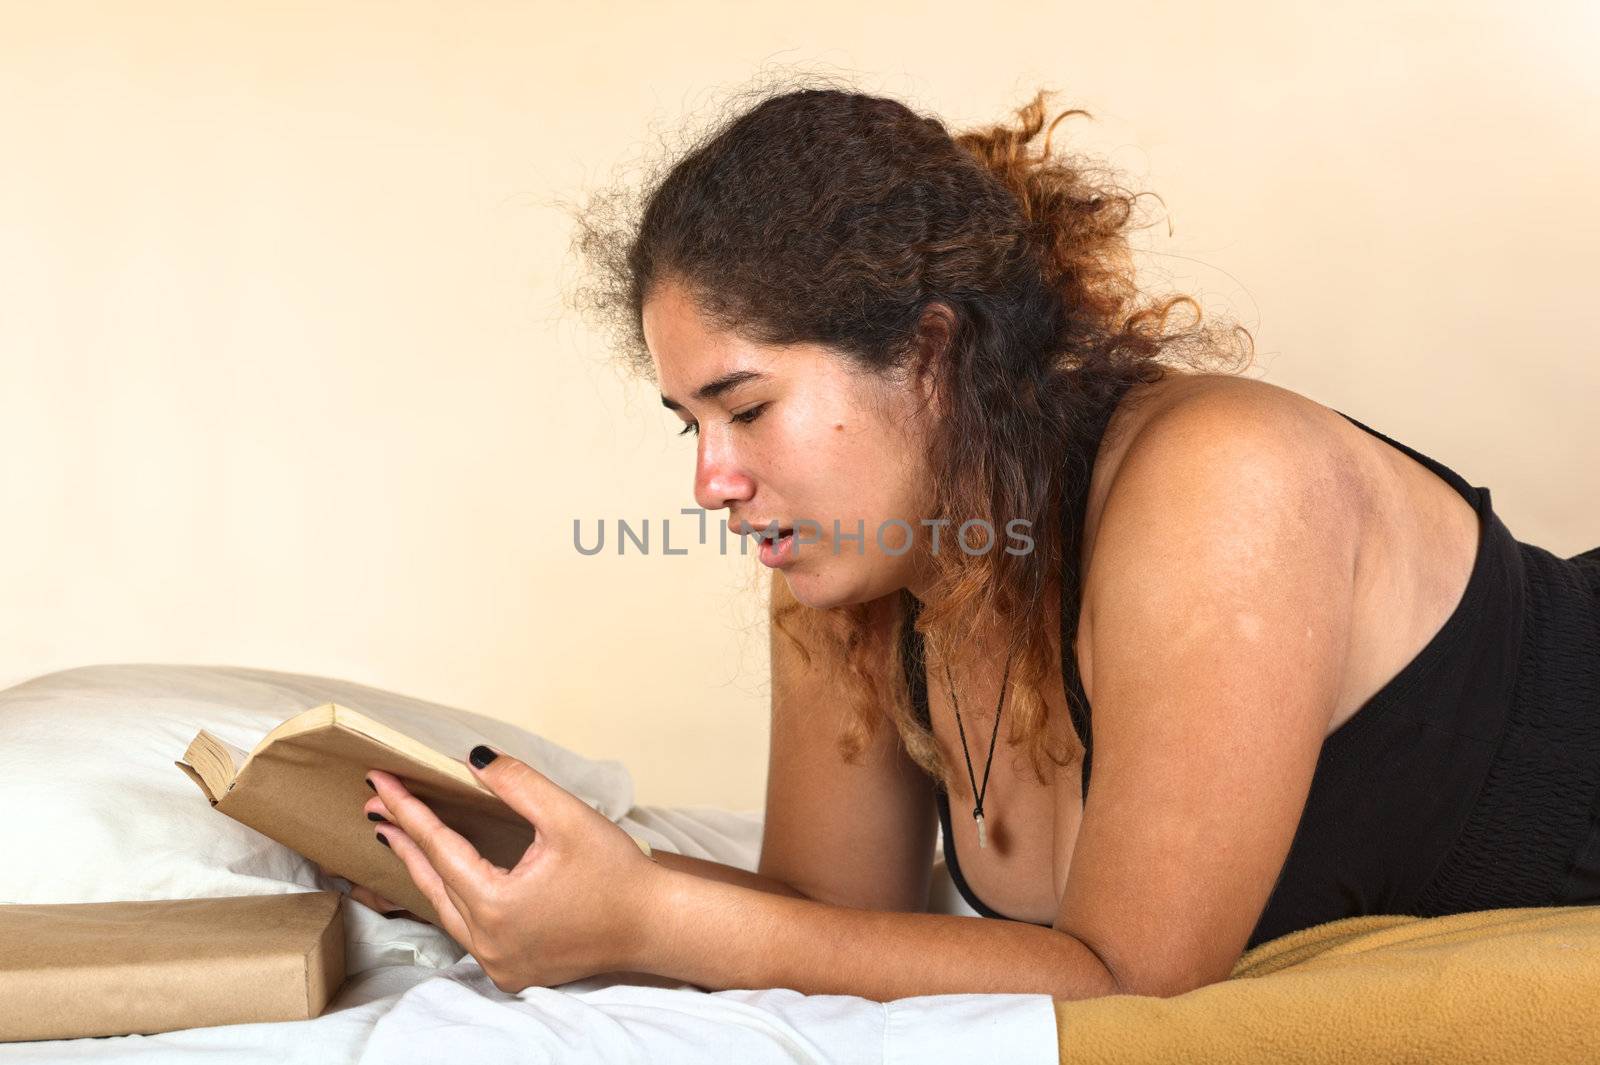 Young Peruvian woman lying on bed and reading a book (Selective Focus, Focus on the left eye of the woman)